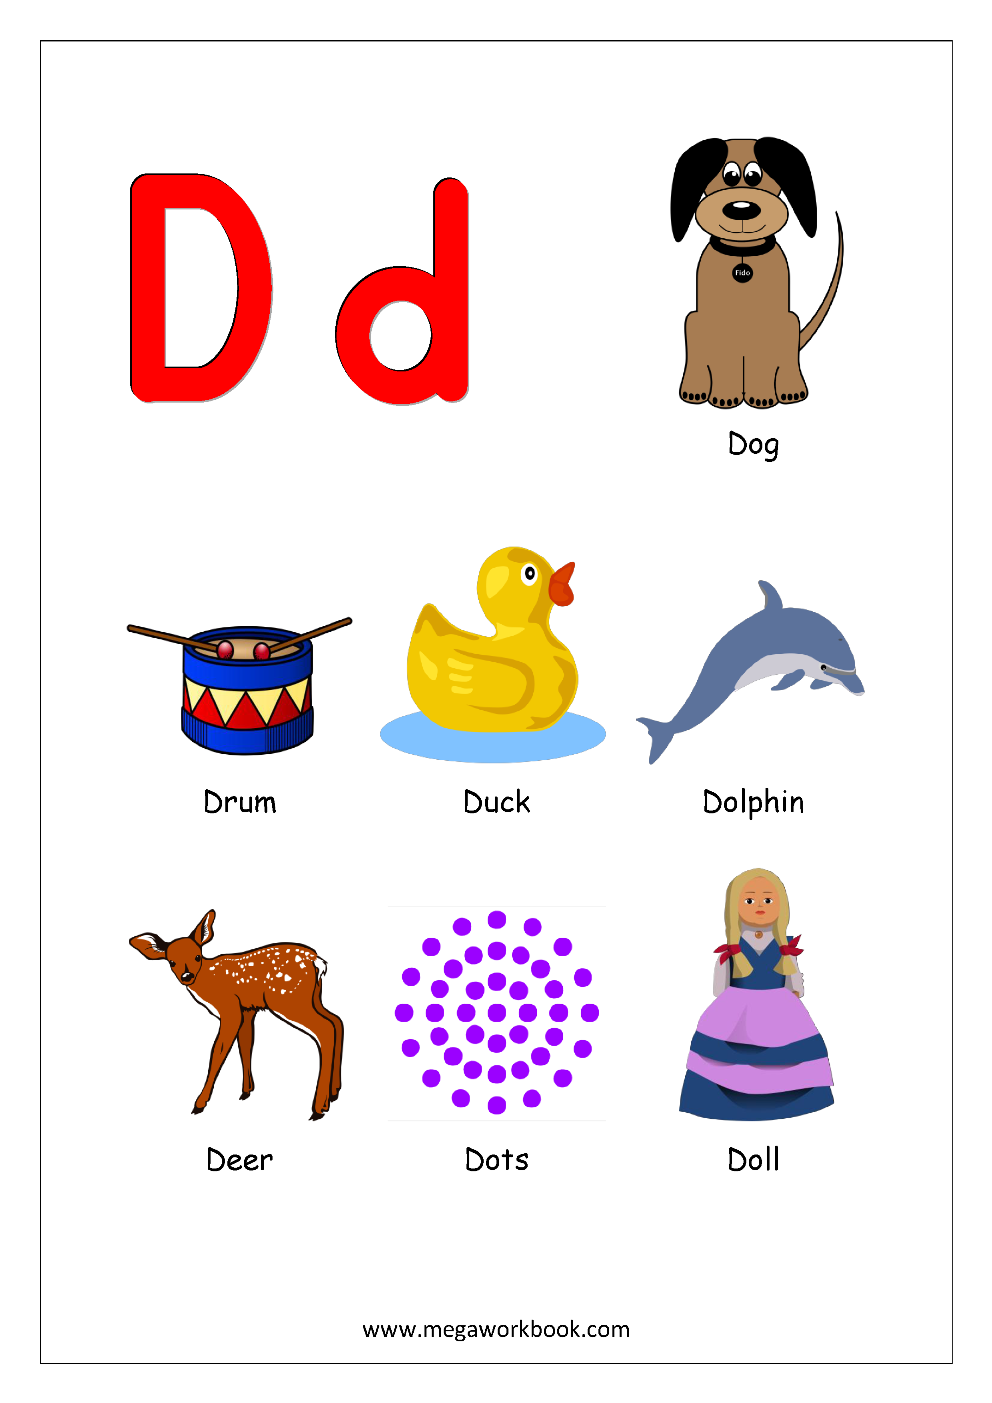 objects that start with the letter o